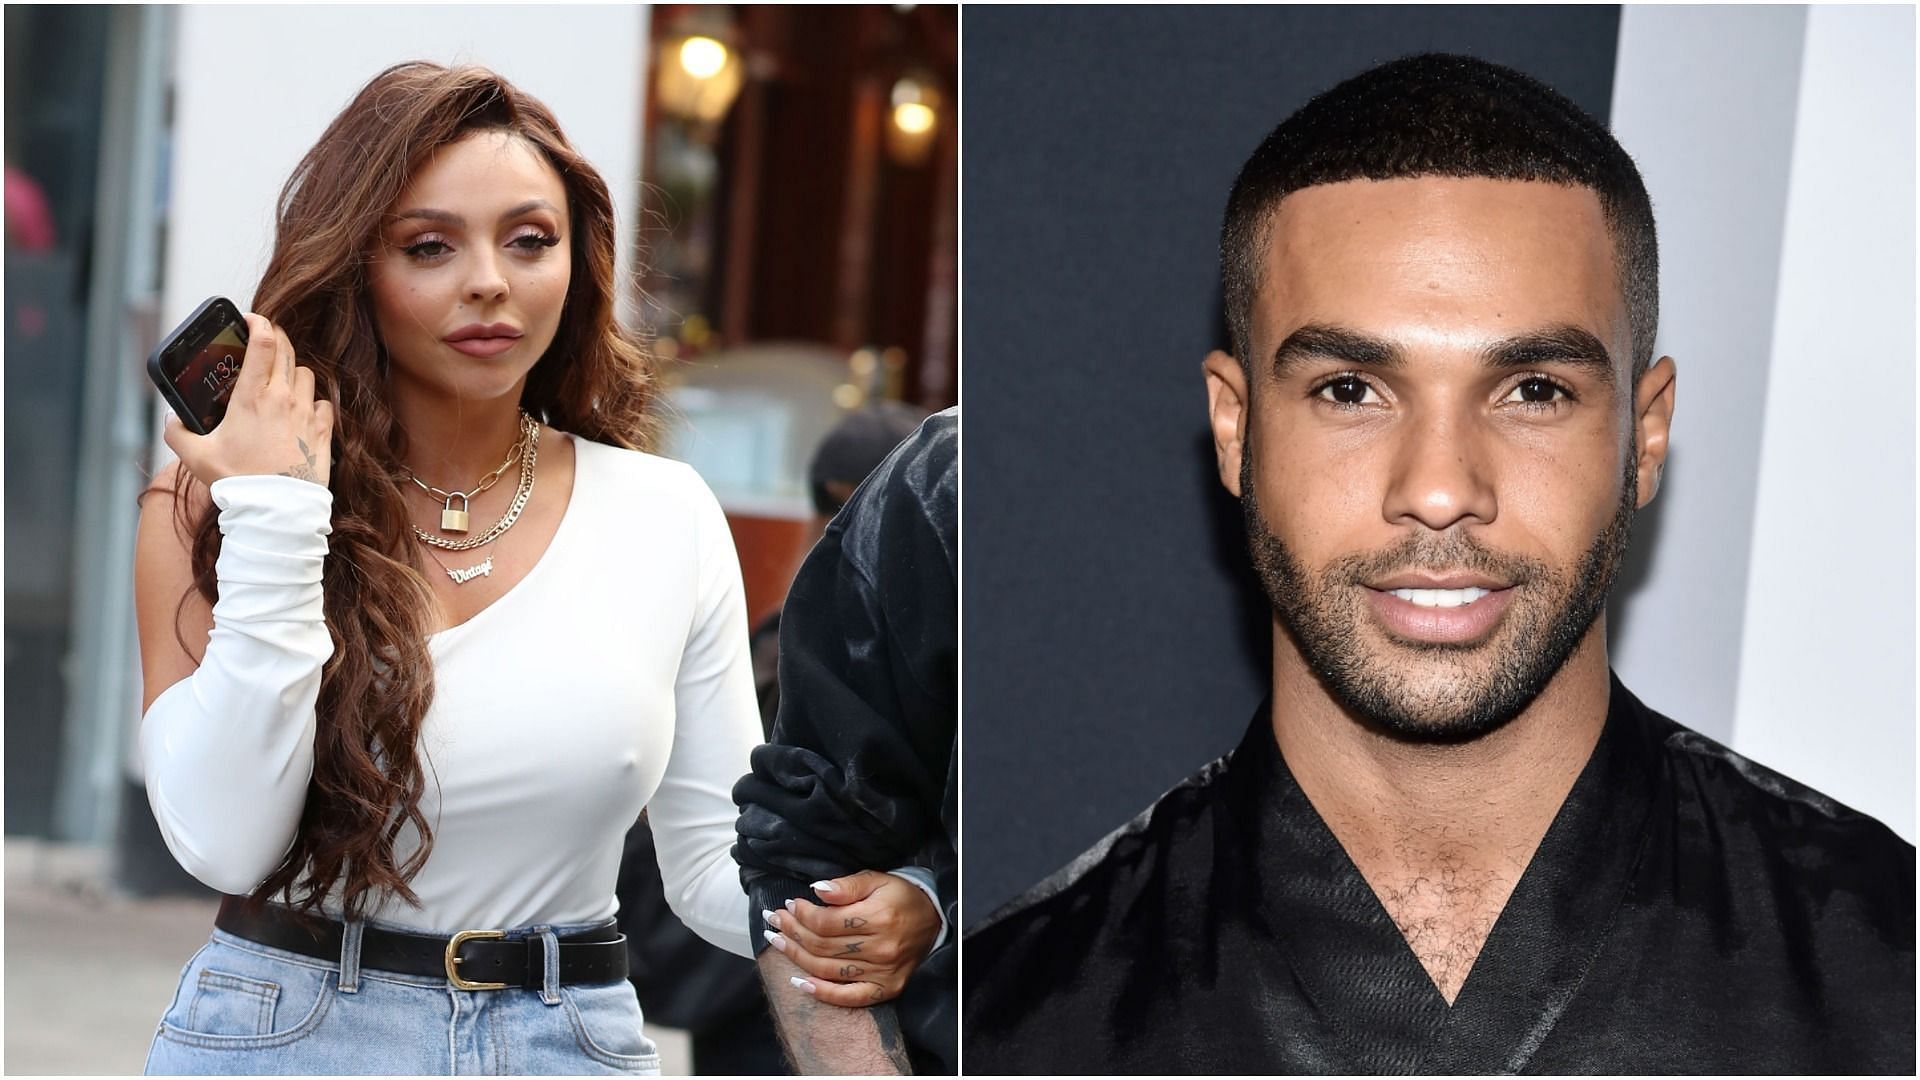 Jesy Nelson and Lucien Laviscount were recently spotted together (Images by Neil Mockford and Steven Ferdman via Getty Images)